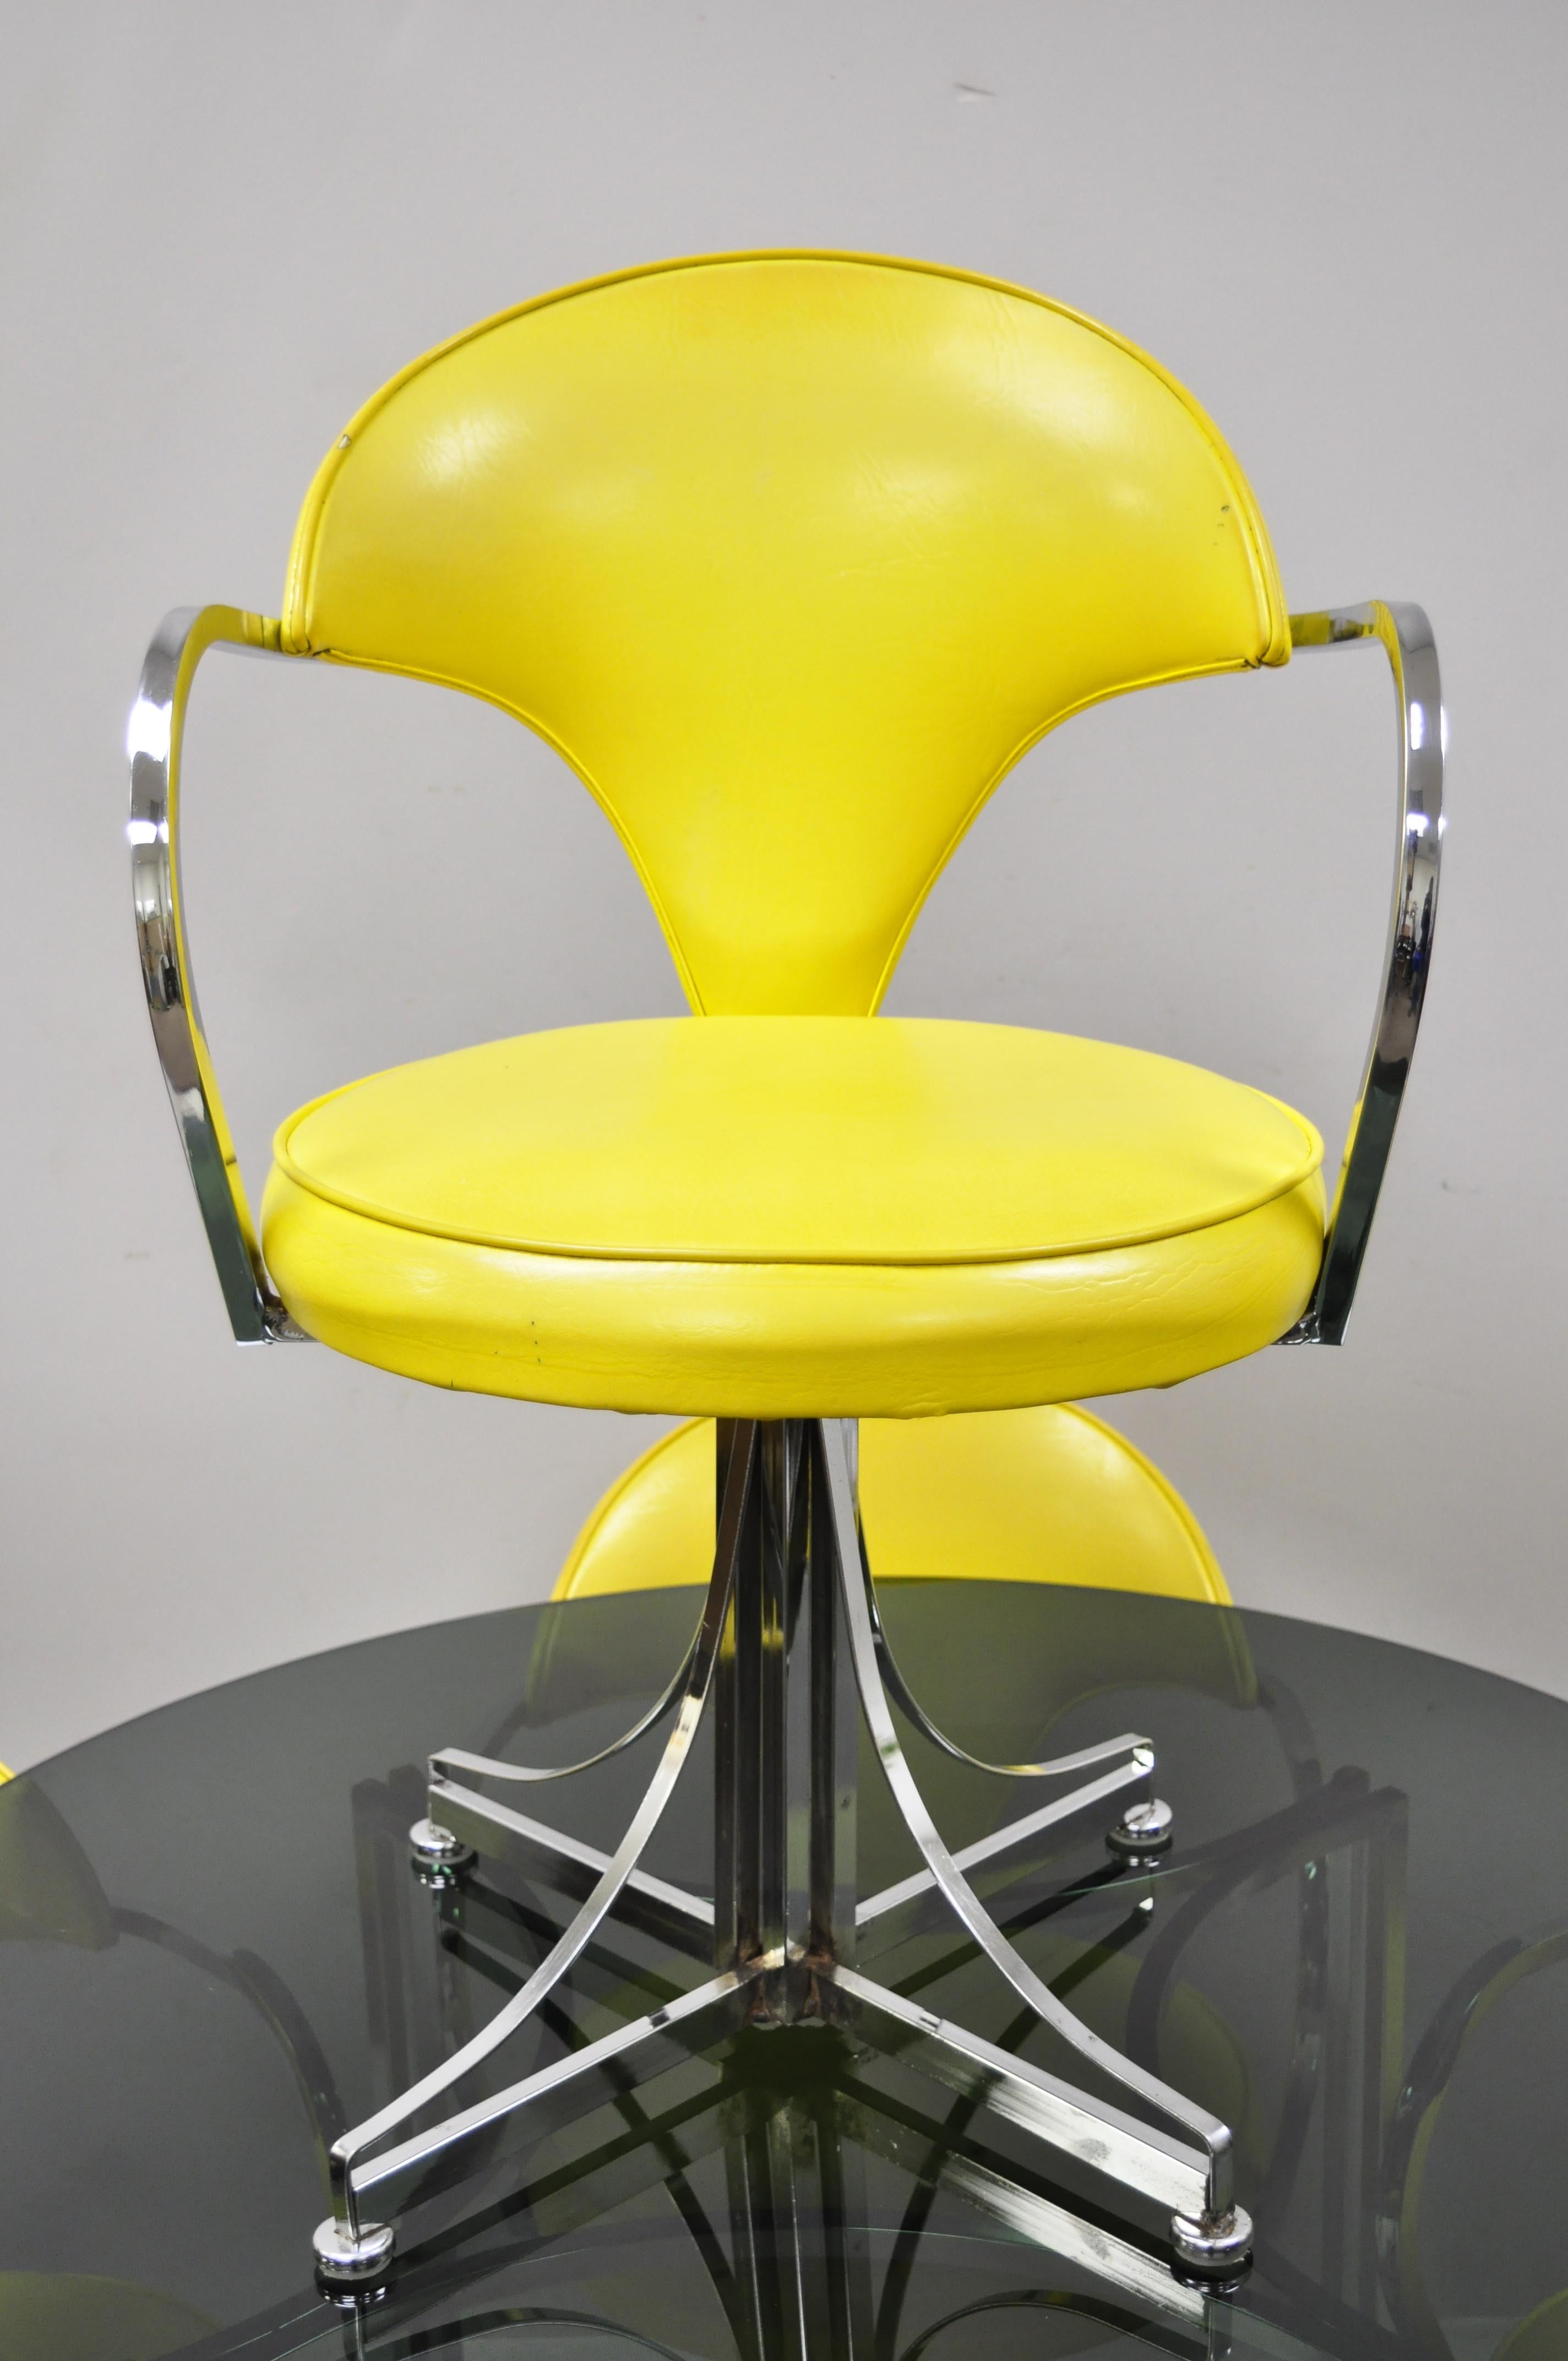 Contempo Frames Inc. Mid-Century Modern yellow vinyl chrome frame dining set, 5 pieces. Set includes (4) chairs, (1) smoked glass top table, chrome base, yellow vinyl upholstery, swivel seats, very nice vintage set, circa mid-20th century.